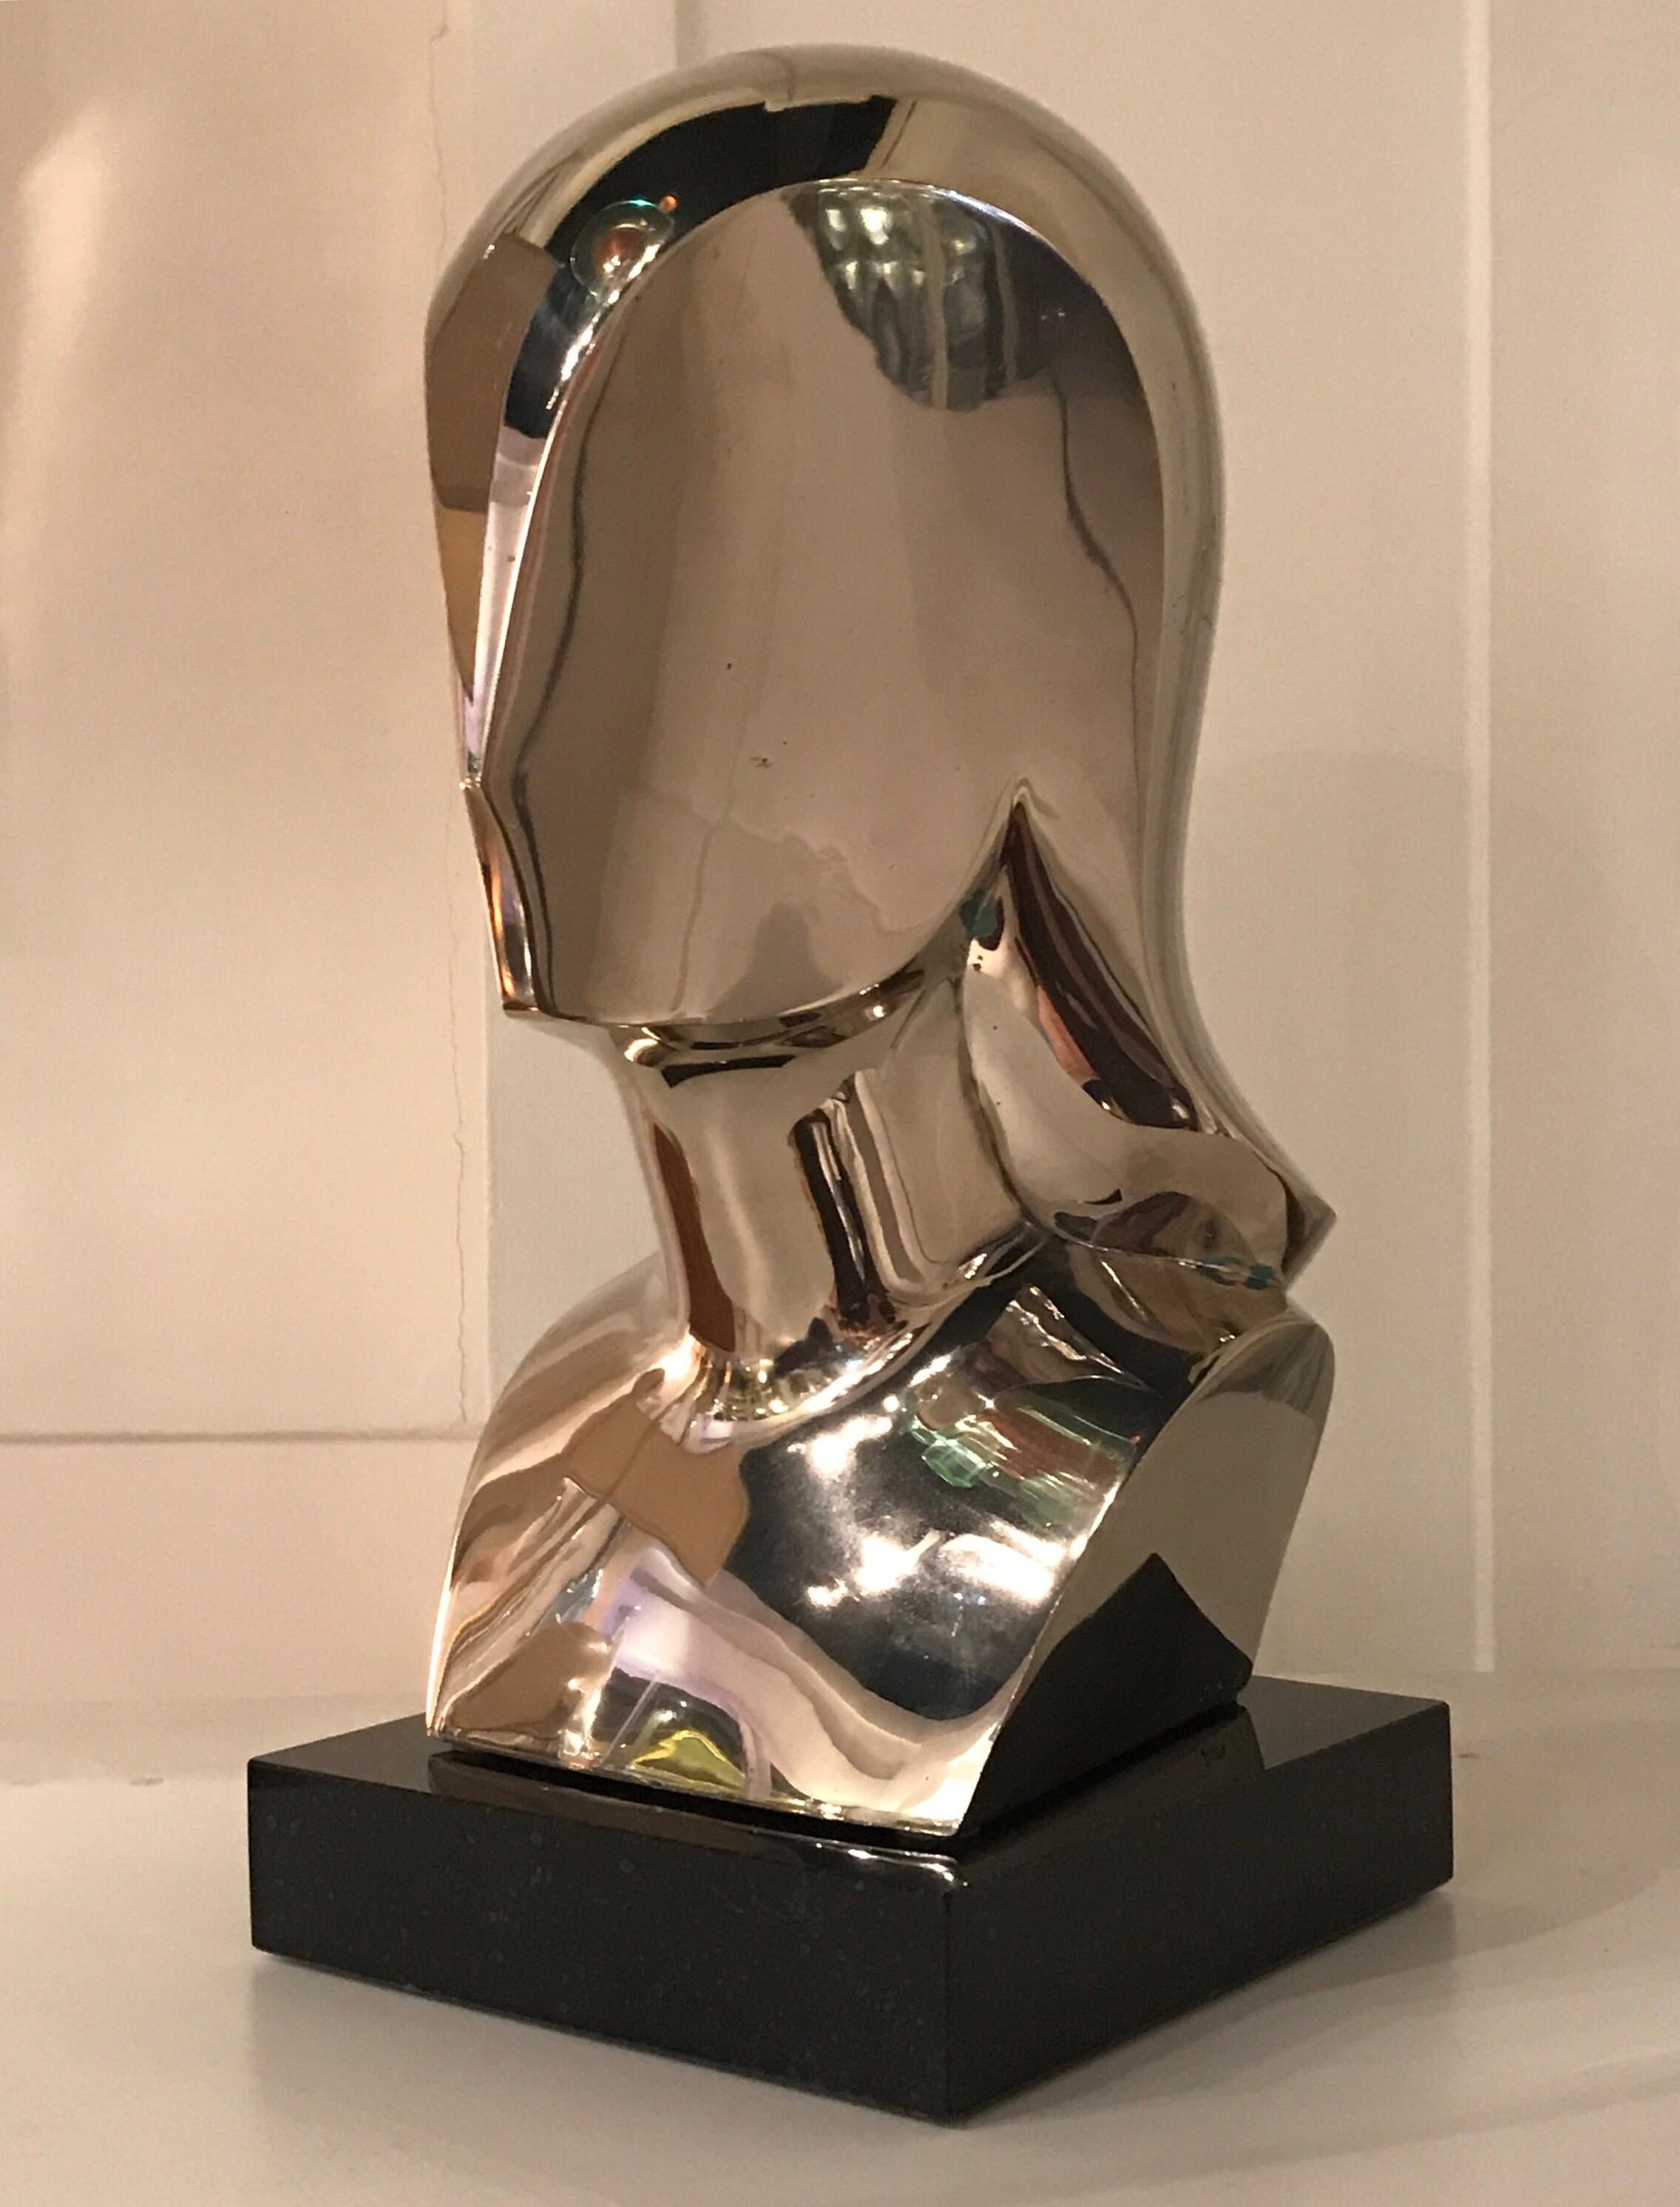 Riccardo Scarpa silvered plated bronze sculpture, circa 1970
Display on black marble base.
Signed Scarpa 1/6.